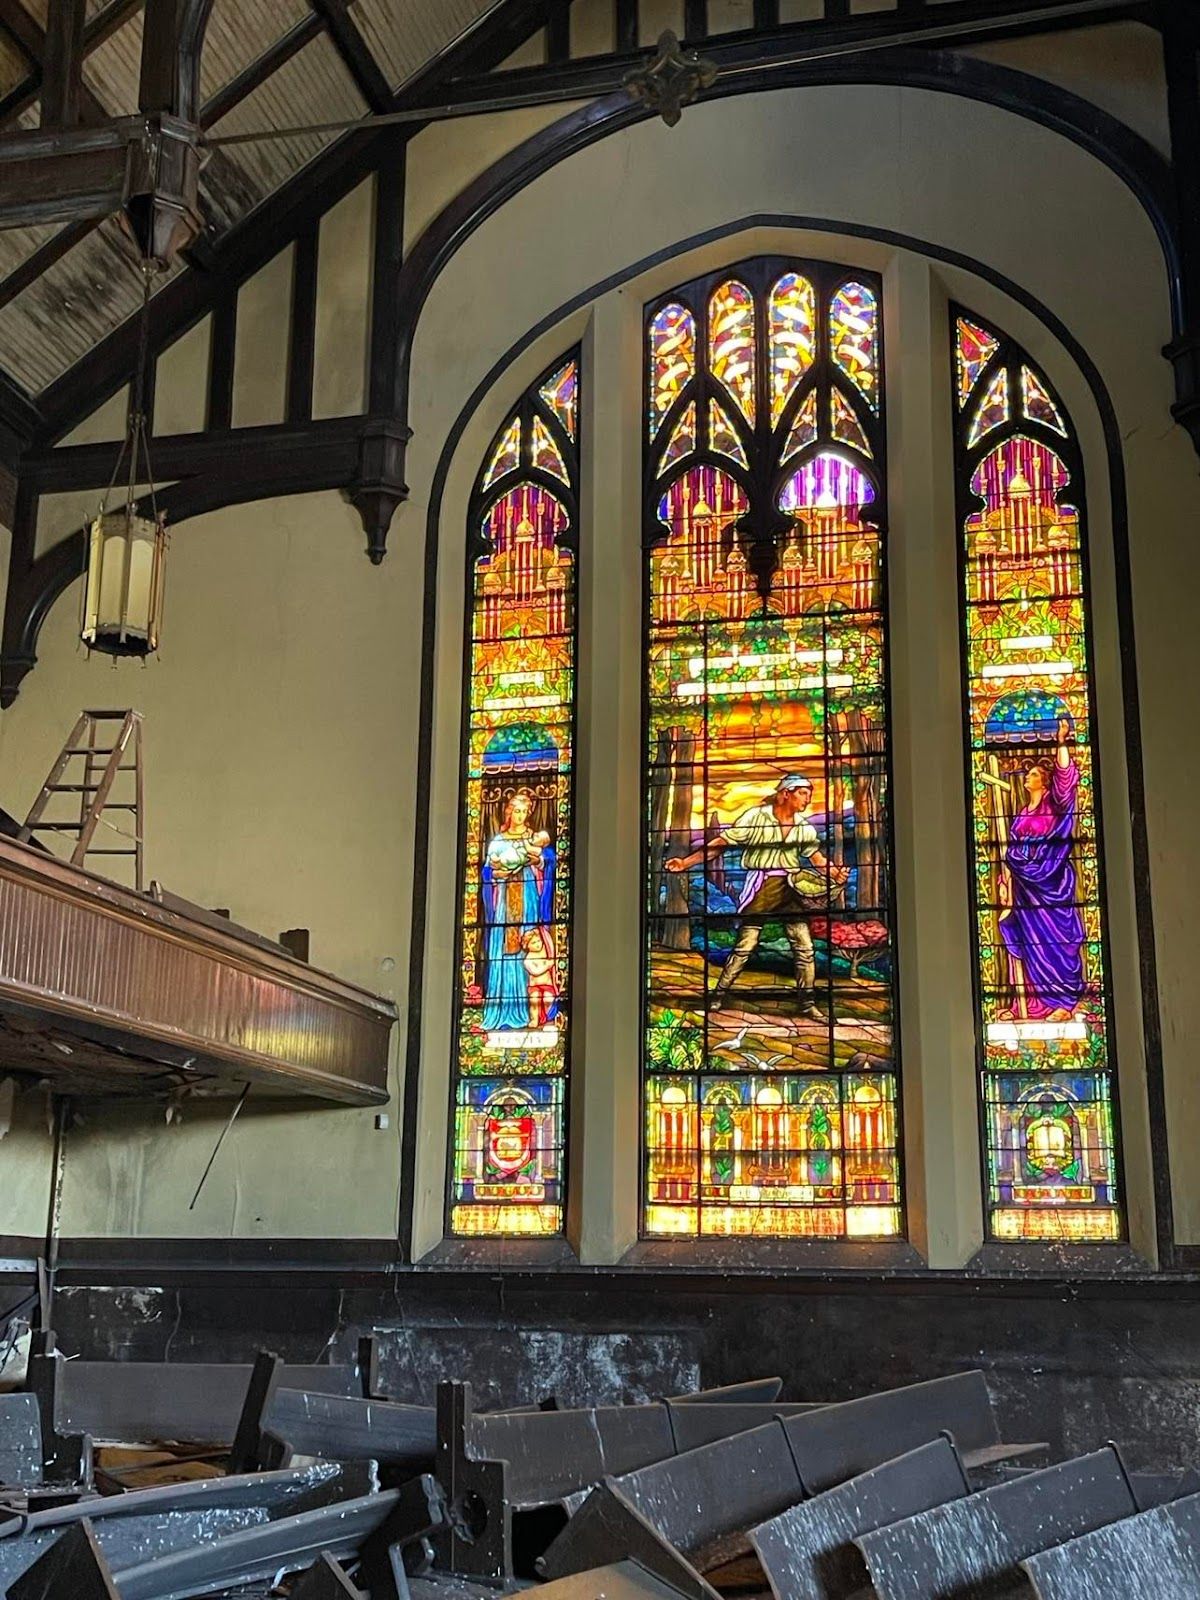 The stained glass is all that remains of the church's former glory. Photo Credit: Mark Tyler